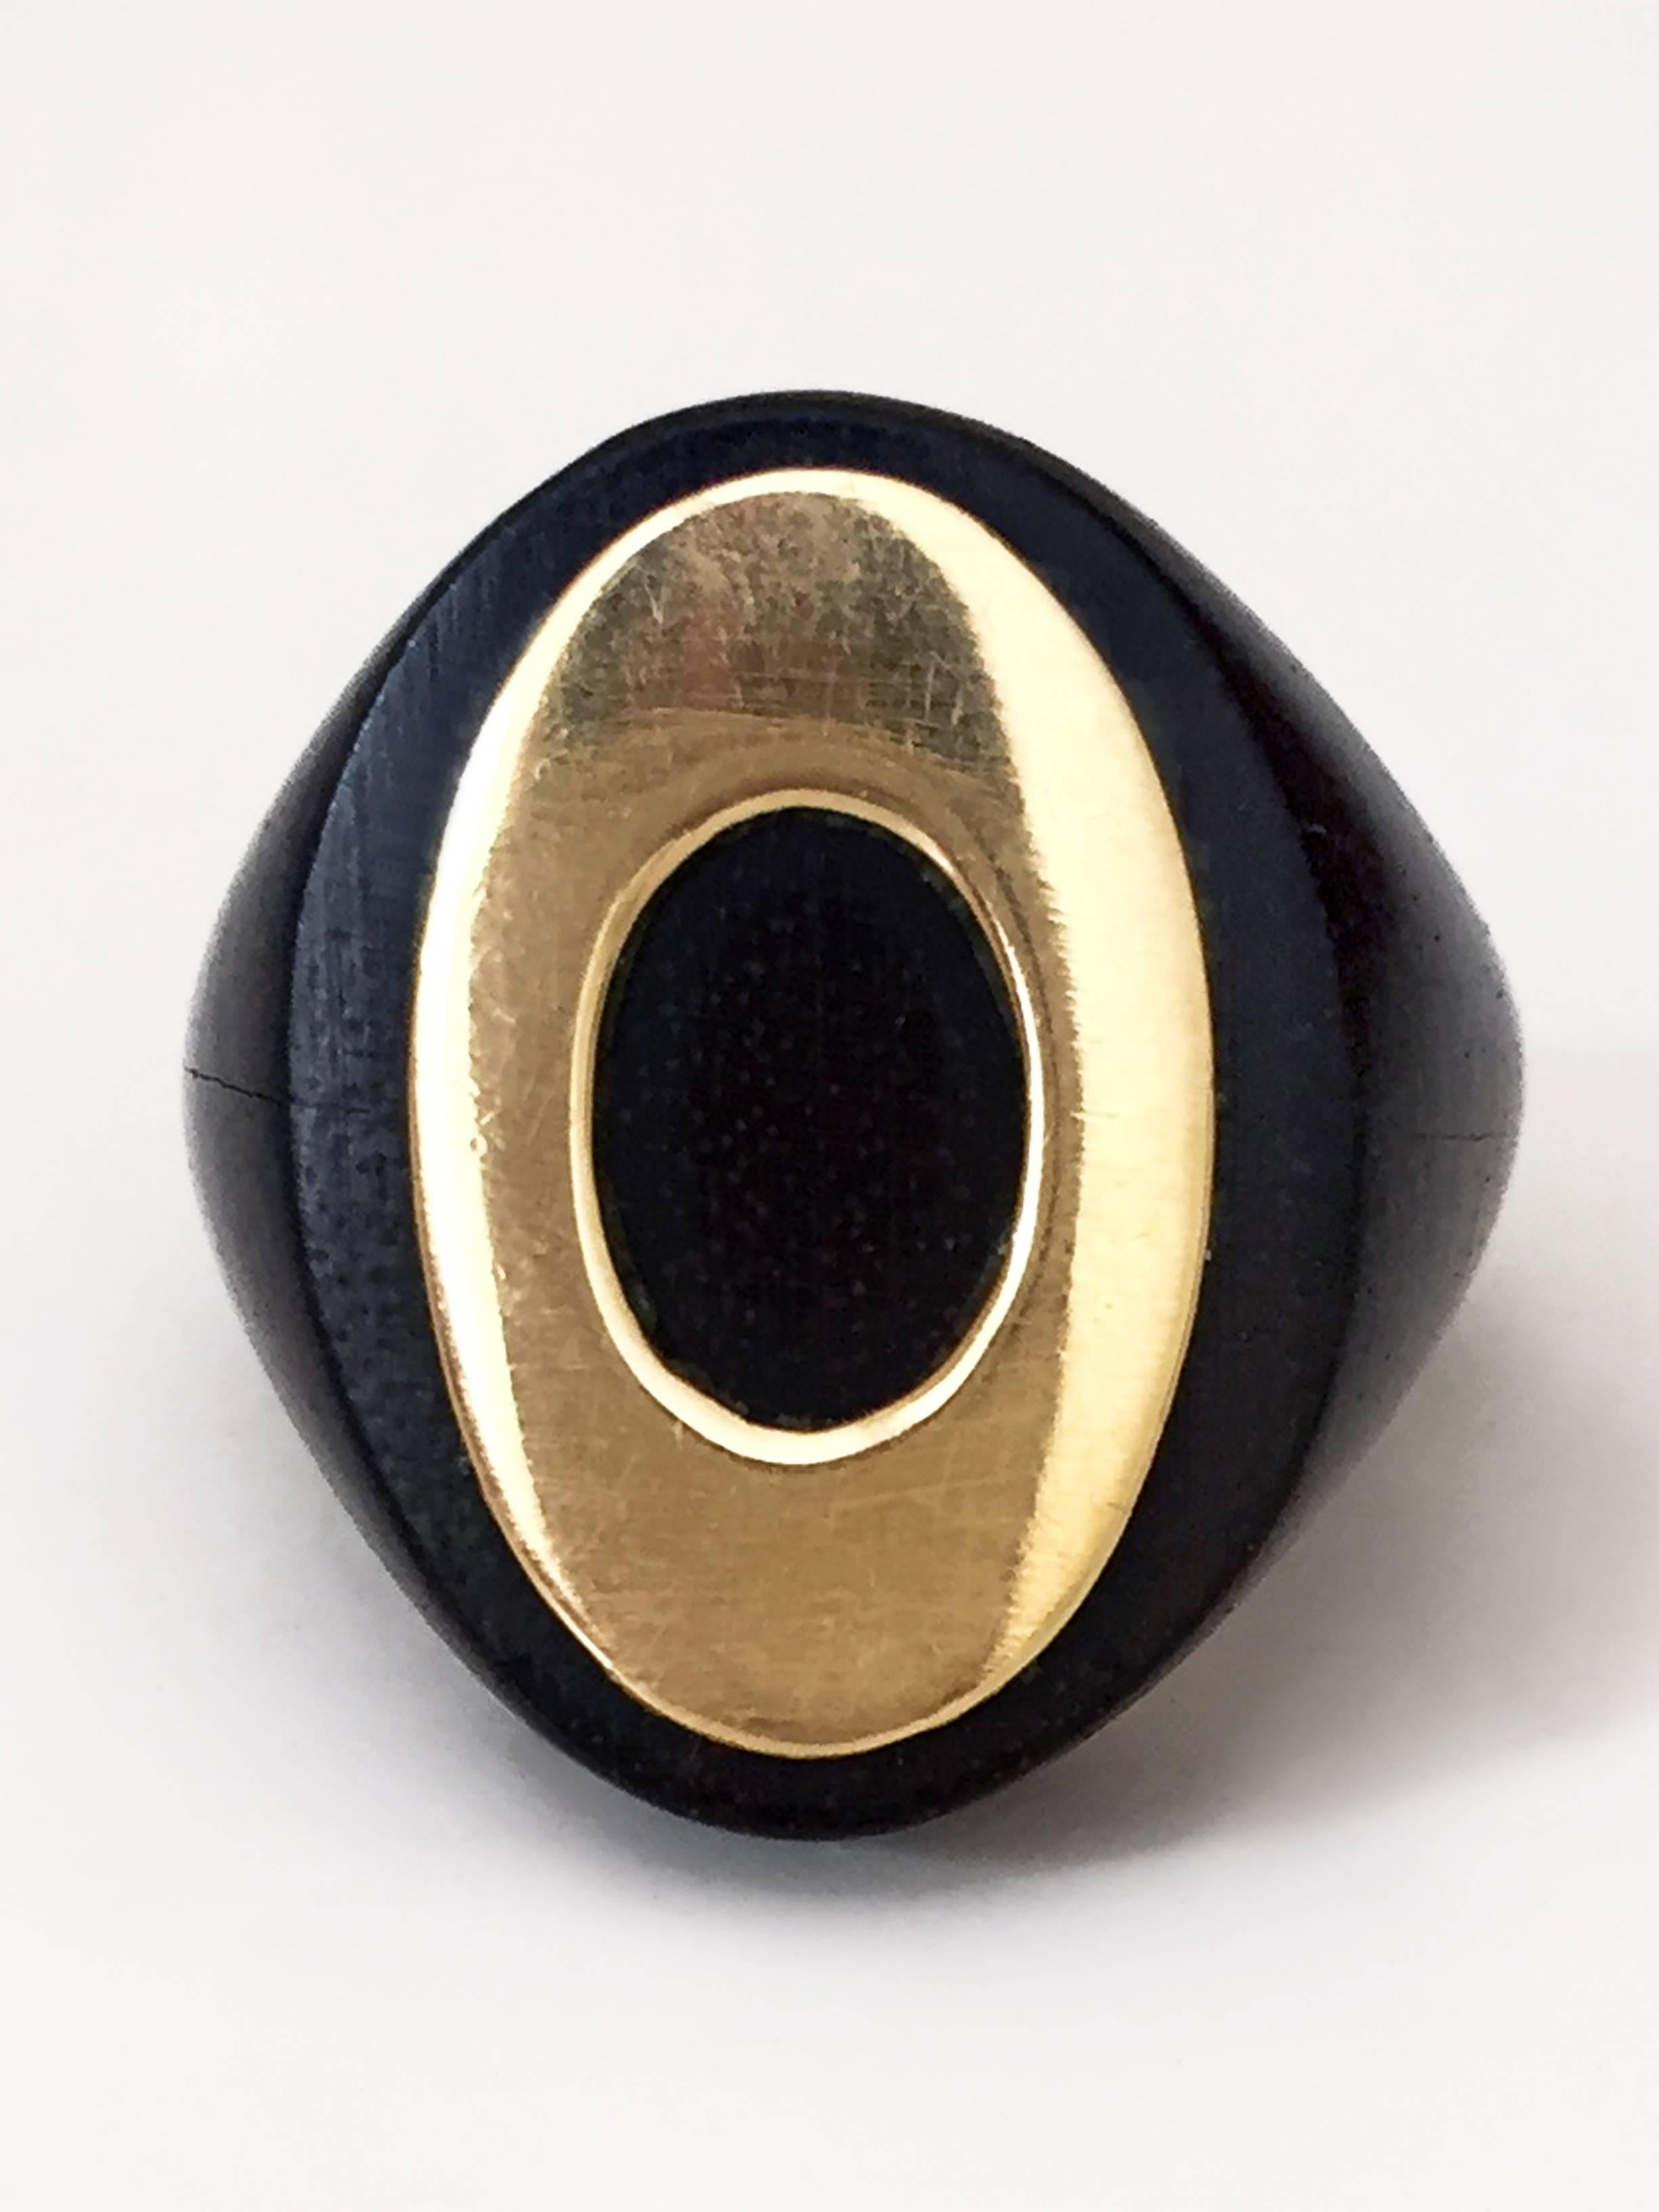 Van Cleef & Arpels wood and gold chevaliere ring
Size: 47 European, 4 US 

Signed VCA - Numbered 118010